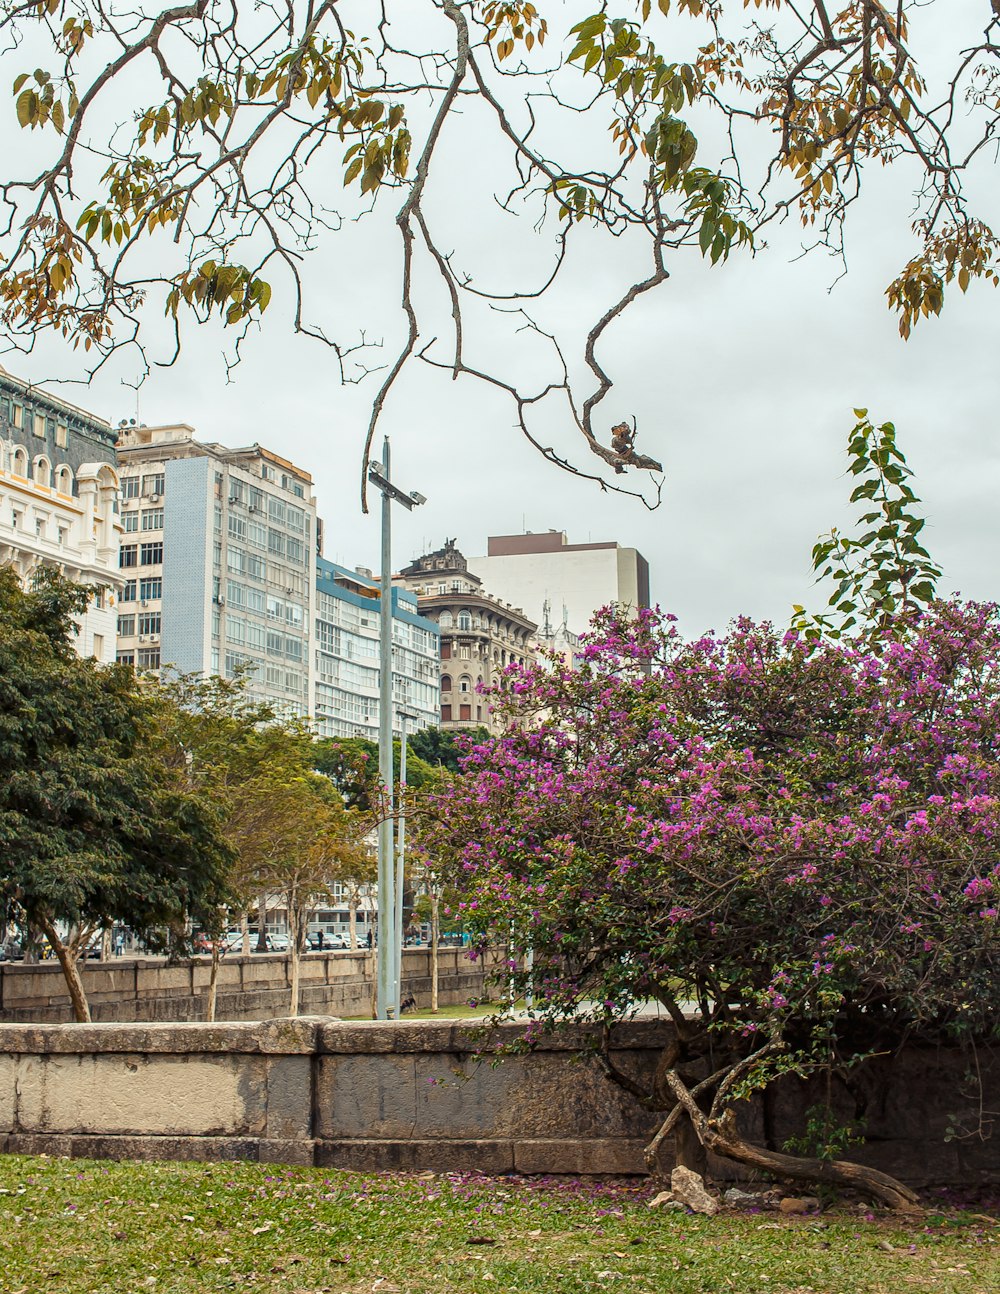 a tree with purple flowers in a city park